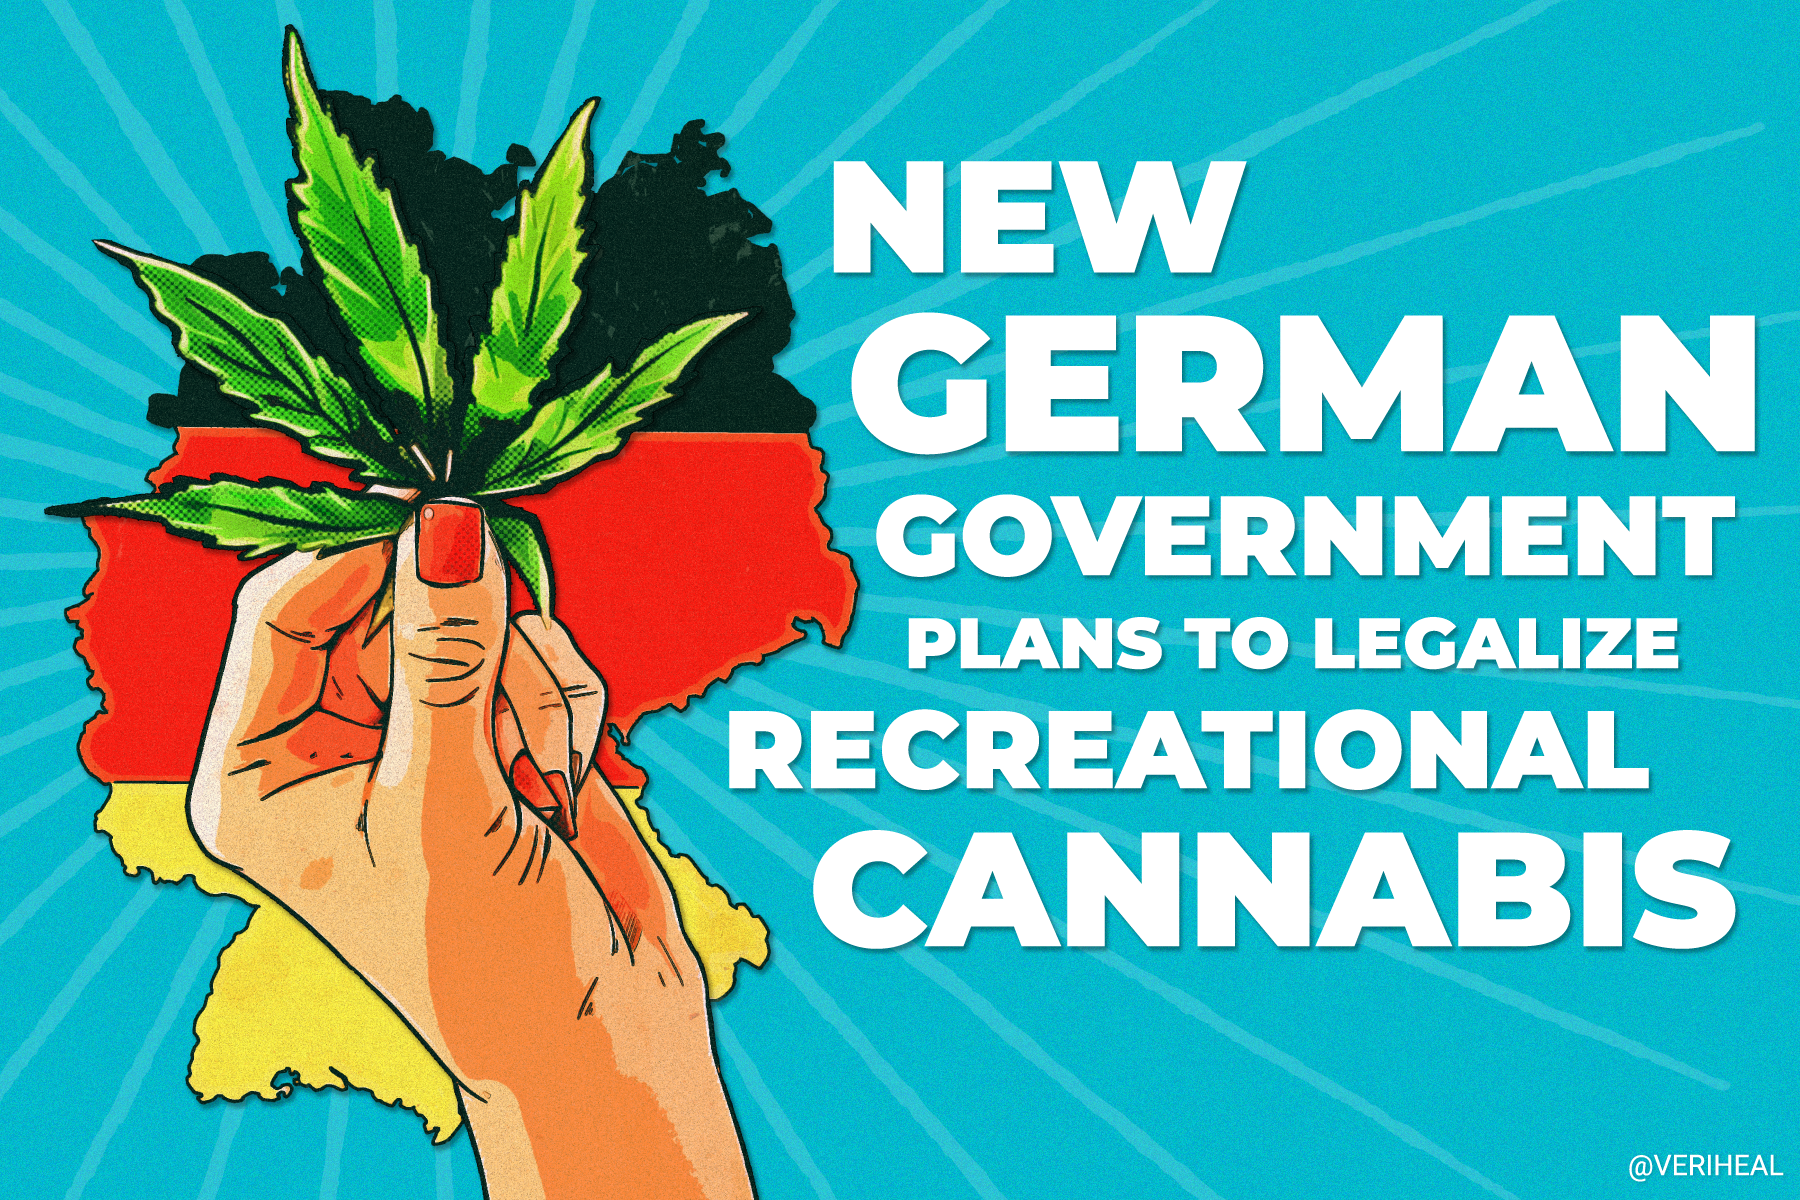 New German Government Plans to Legalize Recreational Cannabis